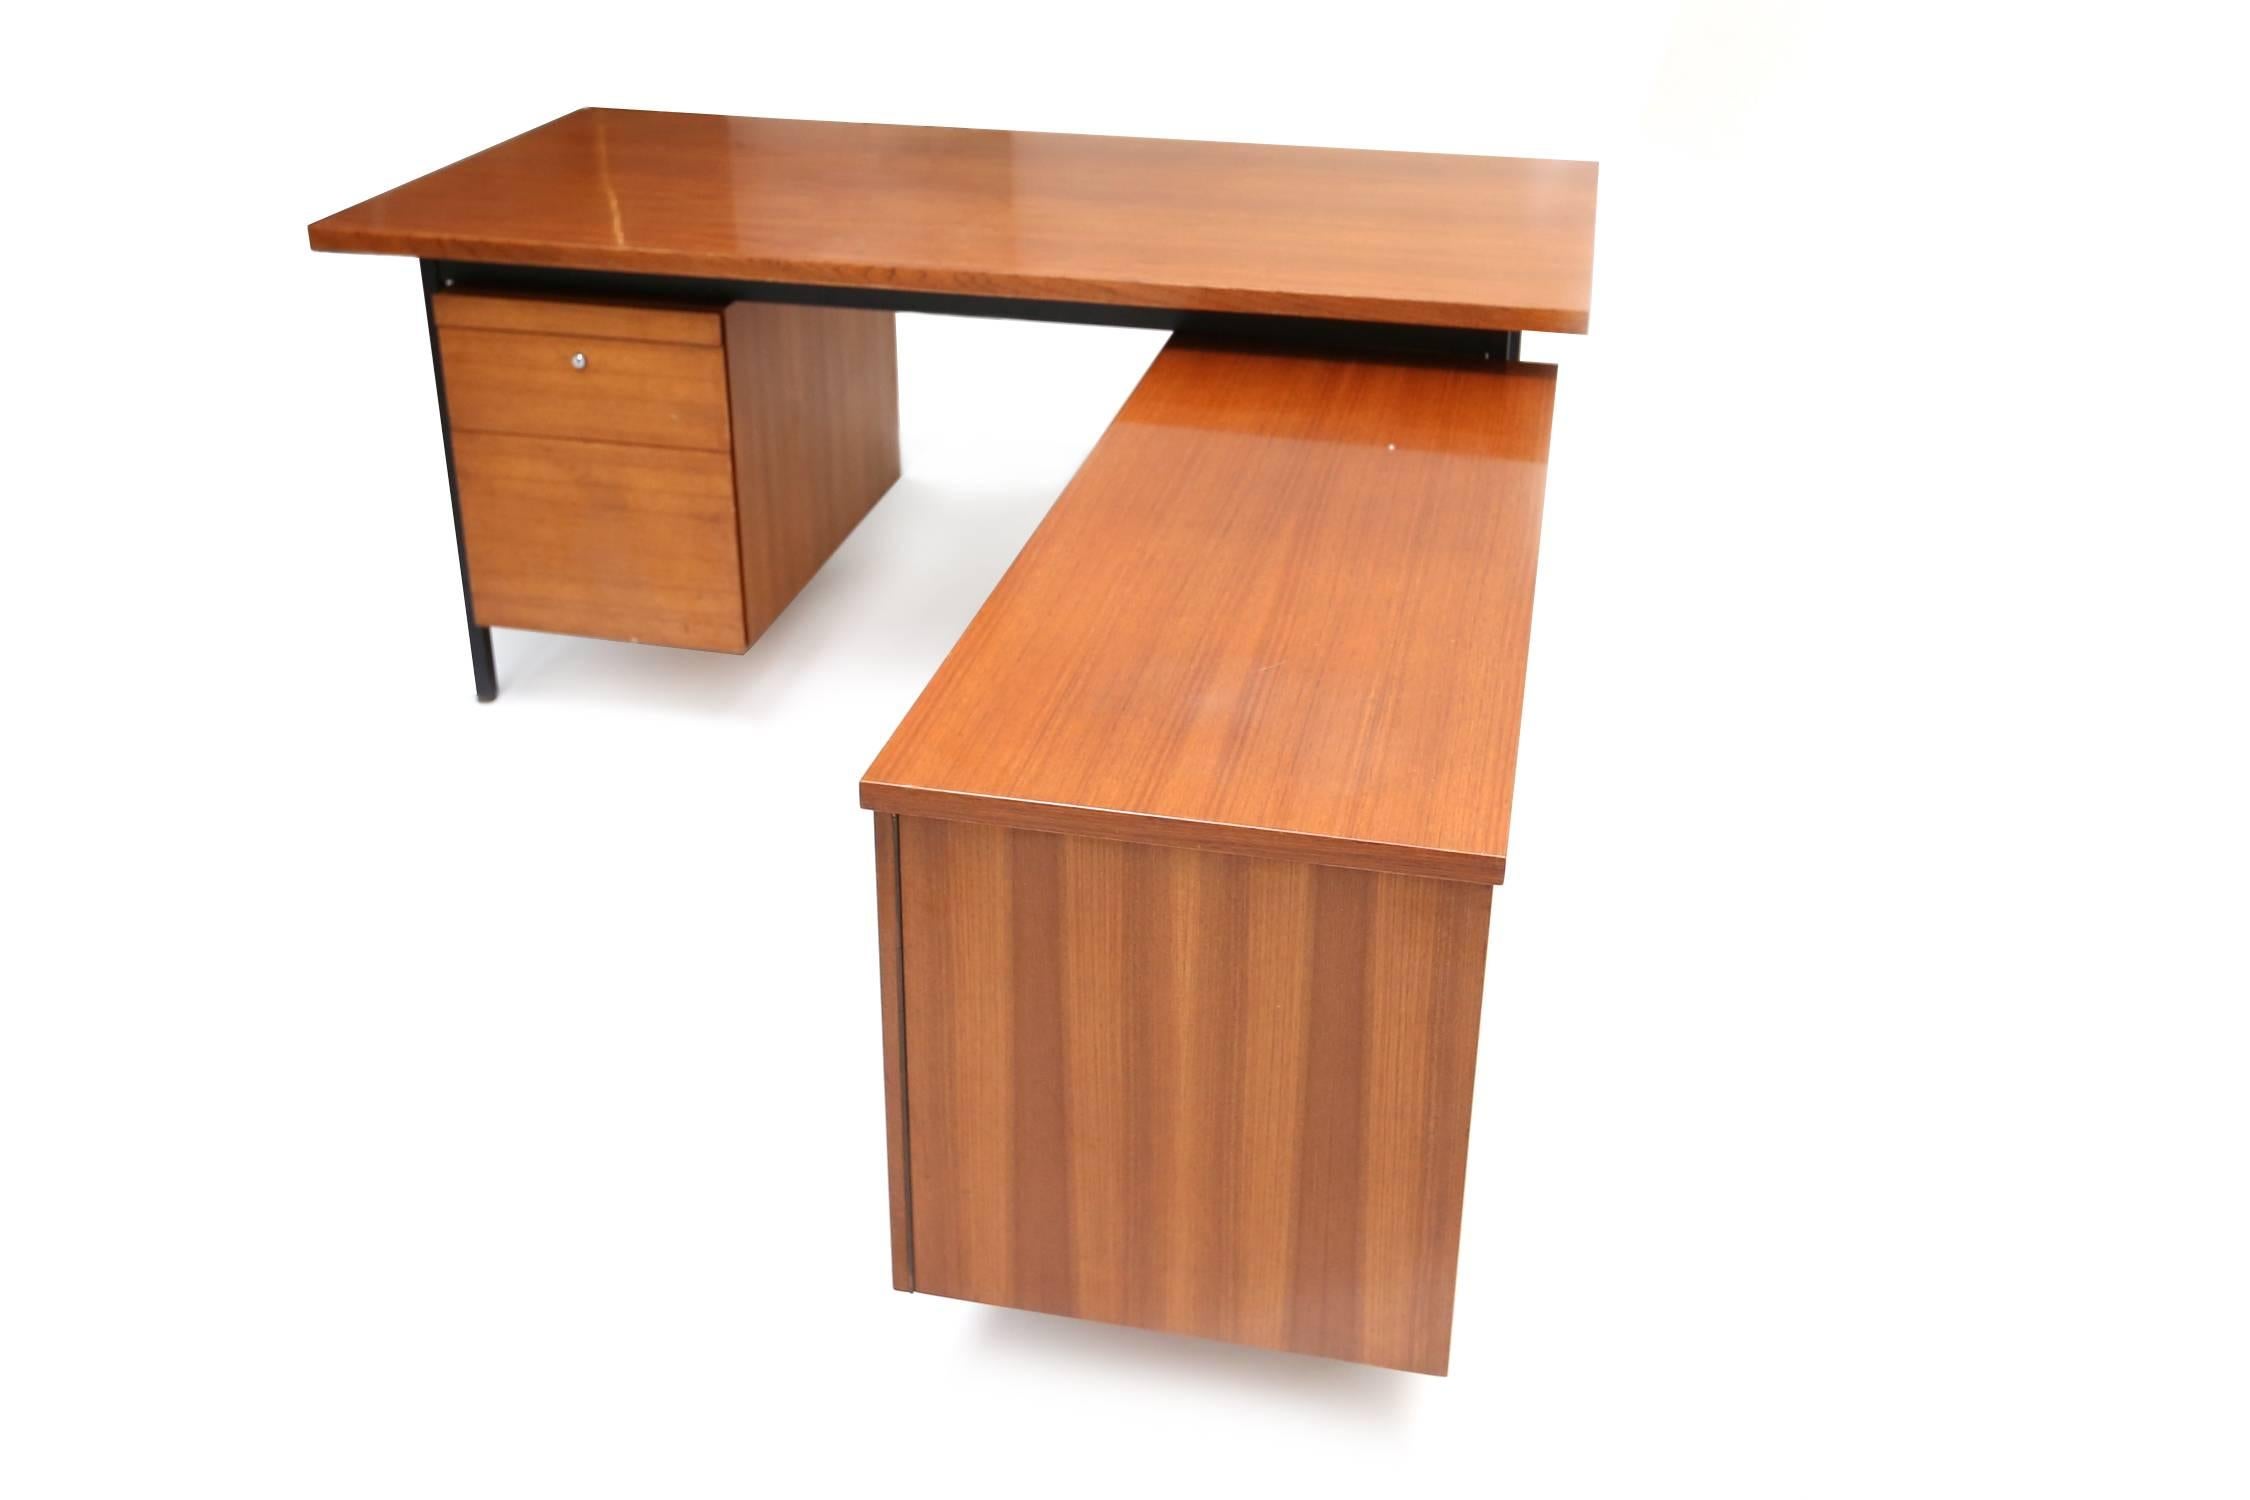 Rare and Beautiful L Shaped Desk
Designed by Florence Knoll
L 167 cm x D 191 cm x H 74 cm
USA, 1950s
